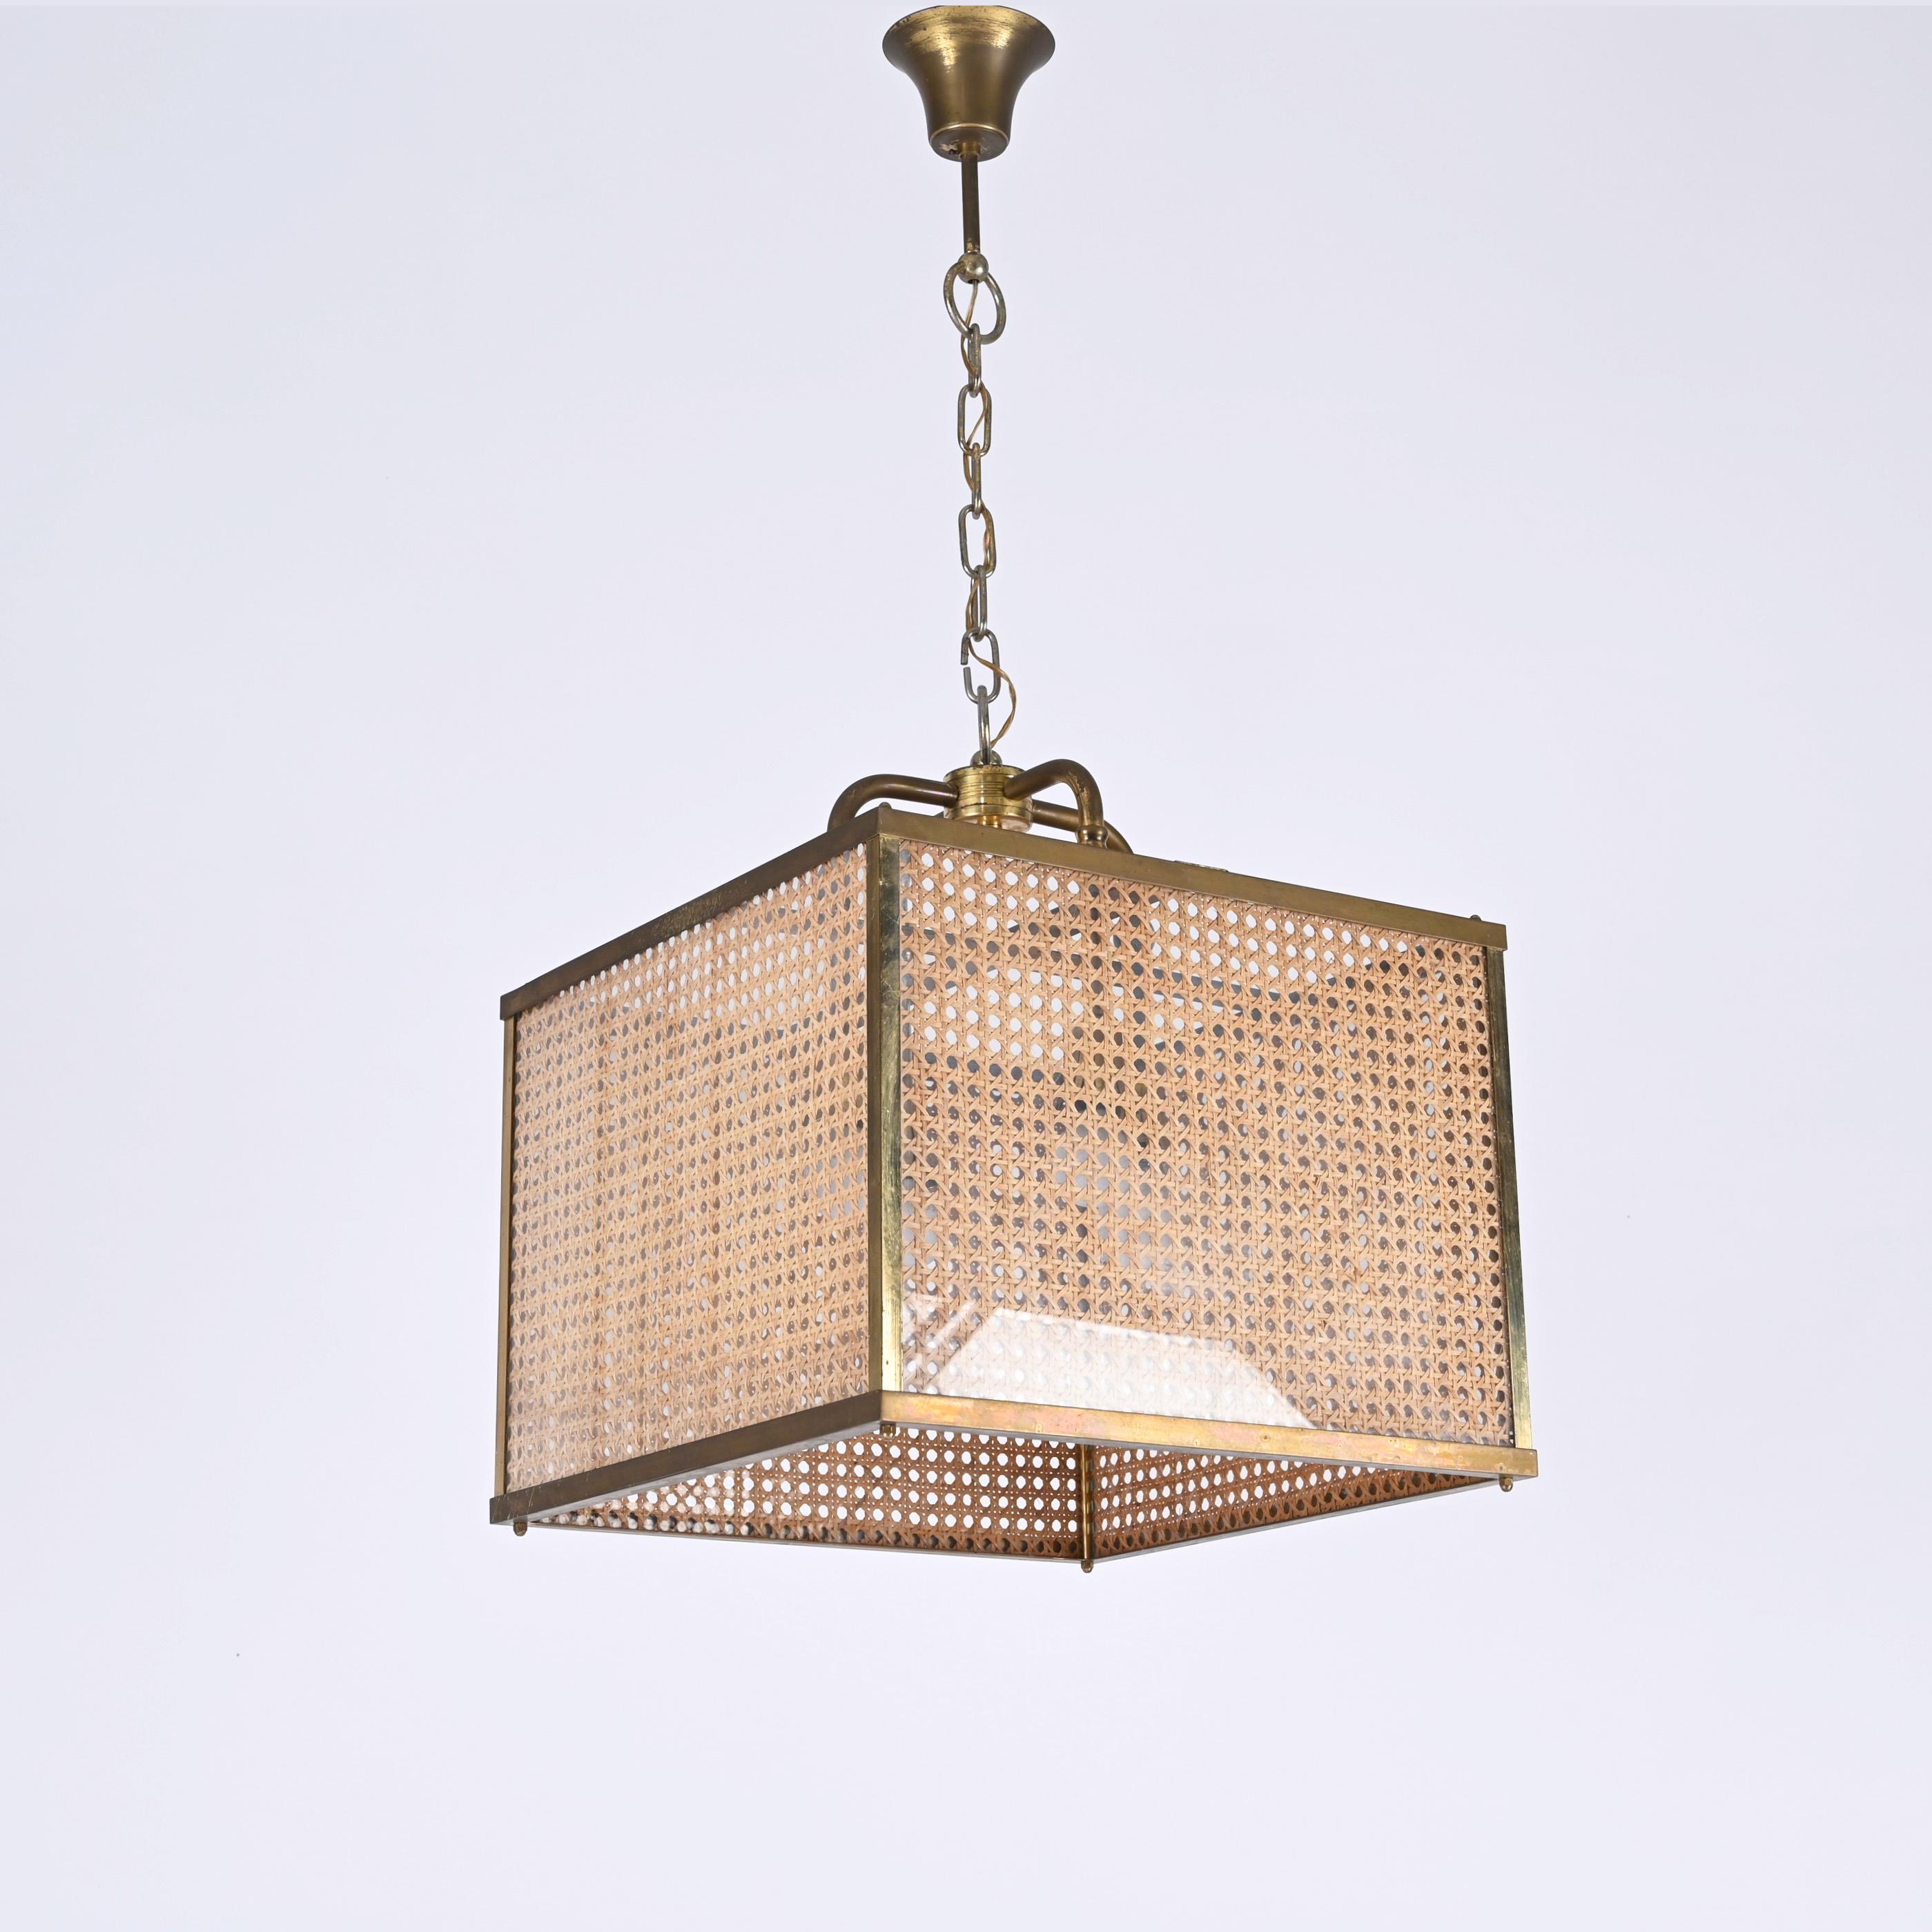 Brass, Vienna Straw Wicker and Glass Square Chandelier Lamp, Italy, 1950s For Sale 2